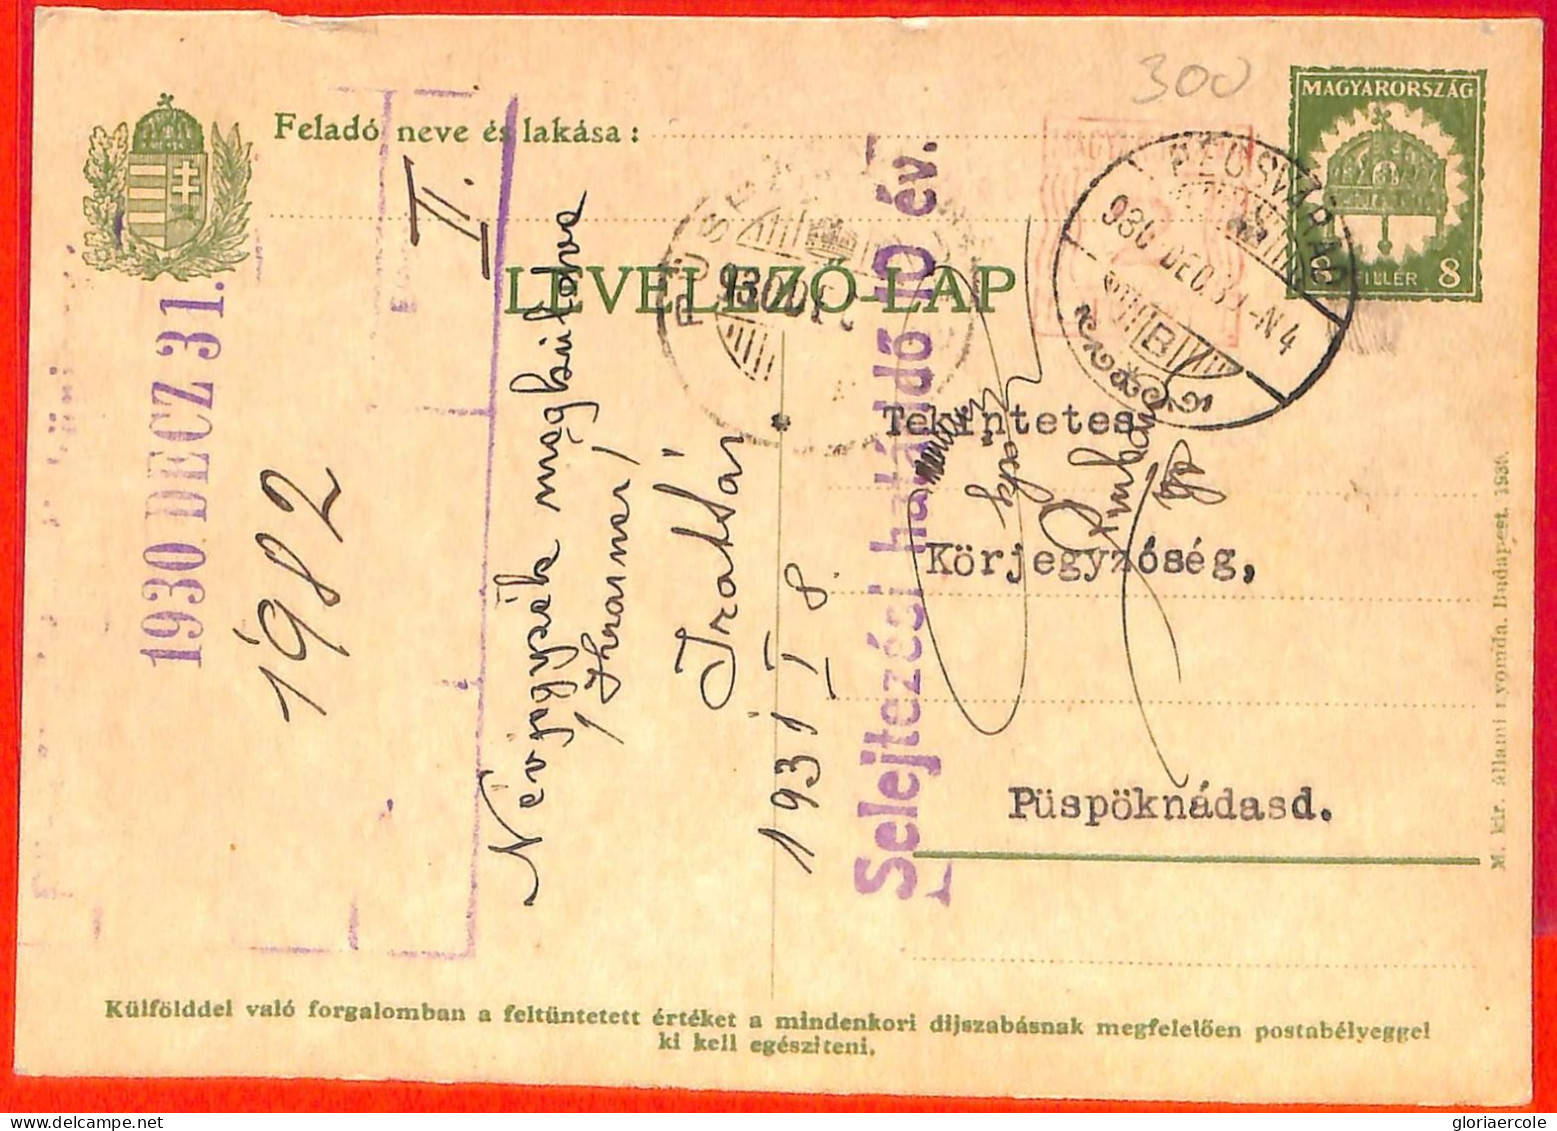 Aa1976 - HUNGARY - Postal History - STATIONERY CARD Added Mechanical Franking 1930 - Oficiales